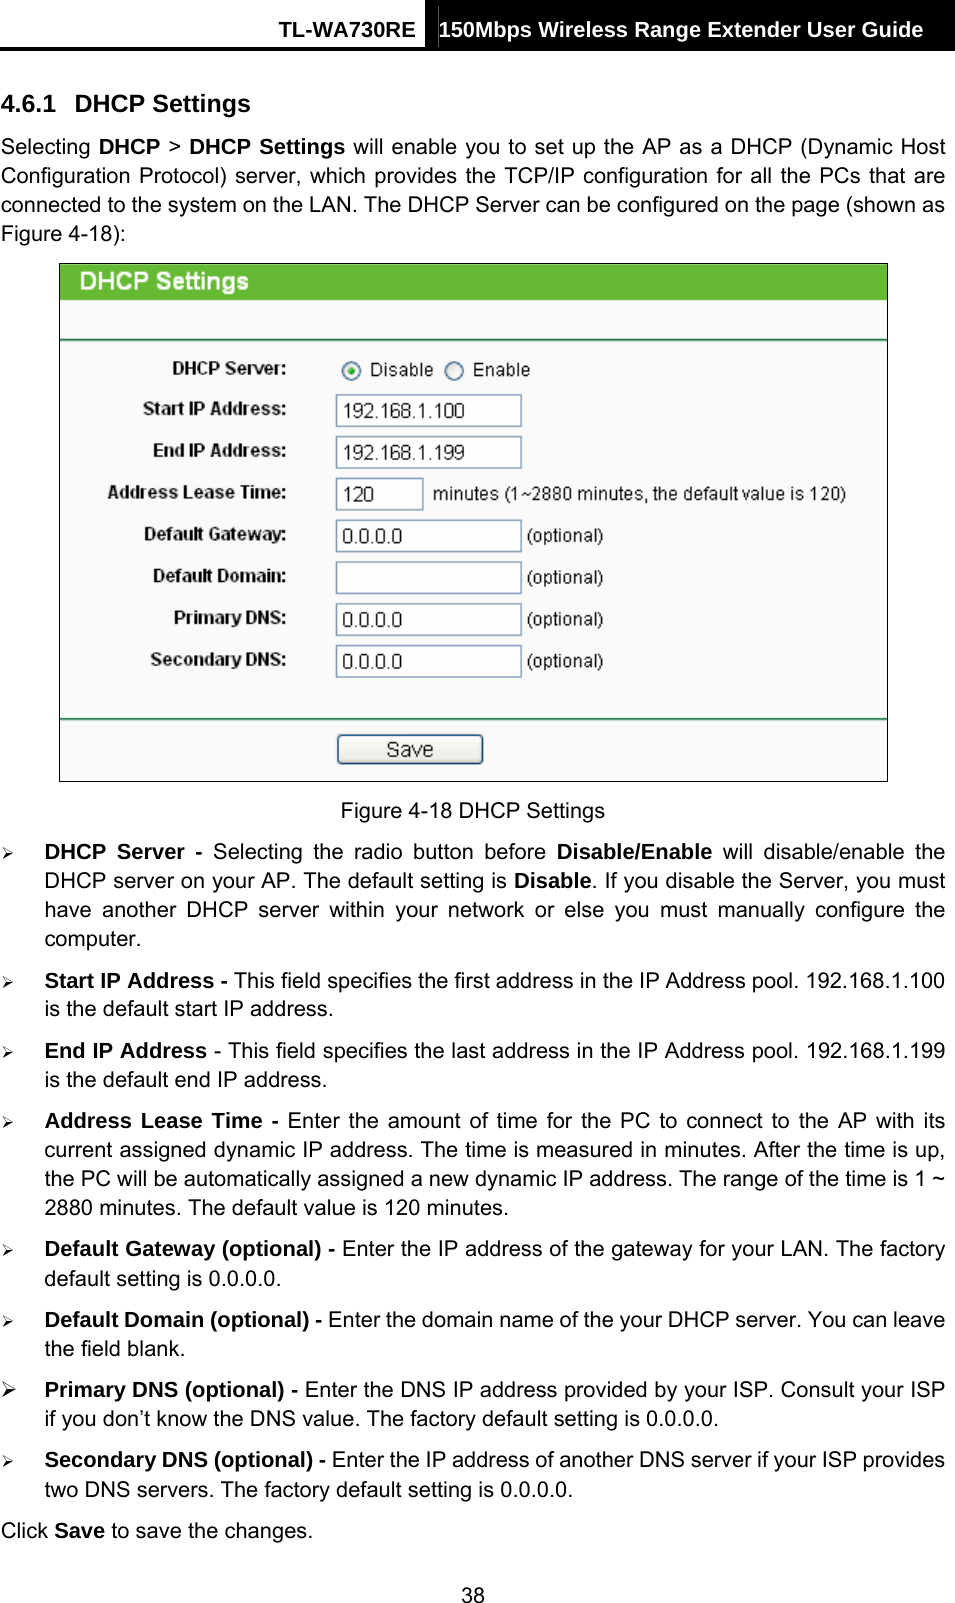 TL-WA730RE 150Mbps Wireless Range Extender User Guide  4.6.1  DHCP Settings Selecting DHCP &gt; DHCP Settings will enable you to set up the AP as a DHCP (Dynamic Host Configuration Protocol) server, which provides the TCP/IP configuration for all the PCs that are connected to the system on the LAN. The DHCP Server can be configured on the page (shown as Figure 4-18):  Figure 4-18 DHCP Settings ¾ DHCP Server - Selecting the radio button before Disable/Enable will disable/enable the DHCP server on your AP. The default setting is Disable. If you disable the Server, you must have another DHCP server within your network or else you must manually configure the computer. ¾ Start IP Address - This field specifies the first address in the IP Address pool. 192.168.1.100 is the default start IP address.   ¾ End IP Address - This field specifies the last address in the IP Address pool. 192.168.1.199 is the default end IP address.   ¾ Address Lease Time - Enter the amount of time for the PC to connect to the AP with its current assigned dynamic IP address. The time is measured in minutes. After the time is up, the PC will be automatically assigned a new dynamic IP address. The range of the time is 1 ~ 2880 minutes. The default value is 120 minutes. ¾ Default Gateway (optional) - Enter the IP address of the gateway for your LAN. The factory default setting is 0.0.0.0. ¾ Default Domain (optional) - Enter the domain name of the your DHCP server. You can leave the field blank. ¾ Primary DNS (optional) - Enter the DNS IP address provided by your ISP. Consult your ISP if you don’t know the DNS value. The factory default setting is 0.0.0.0. ¾ Secondary DNS (optional) - Enter the IP address of another DNS server if your ISP provides two DNS servers. The factory default setting is 0.0.0.0. Click Save to save the changes. 38 